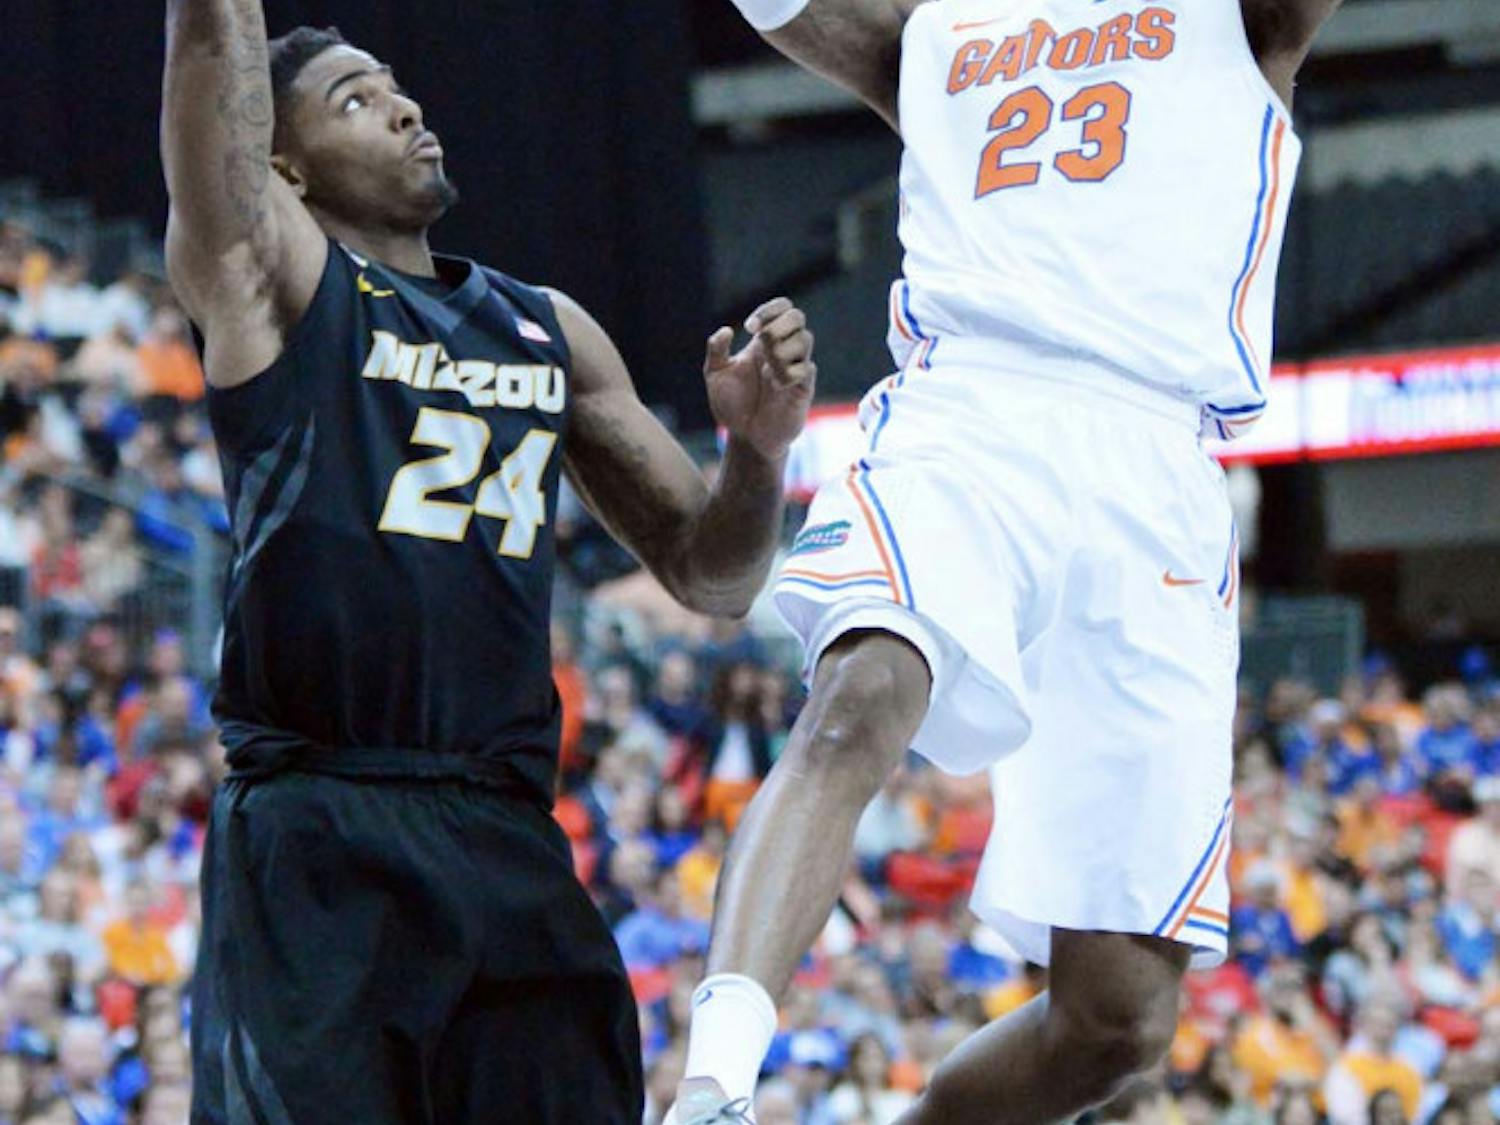 Chris Walker attempts a layup during Florida's 72-49 win against Missouri on March 14 in the Georgia Dome in Atlanta.